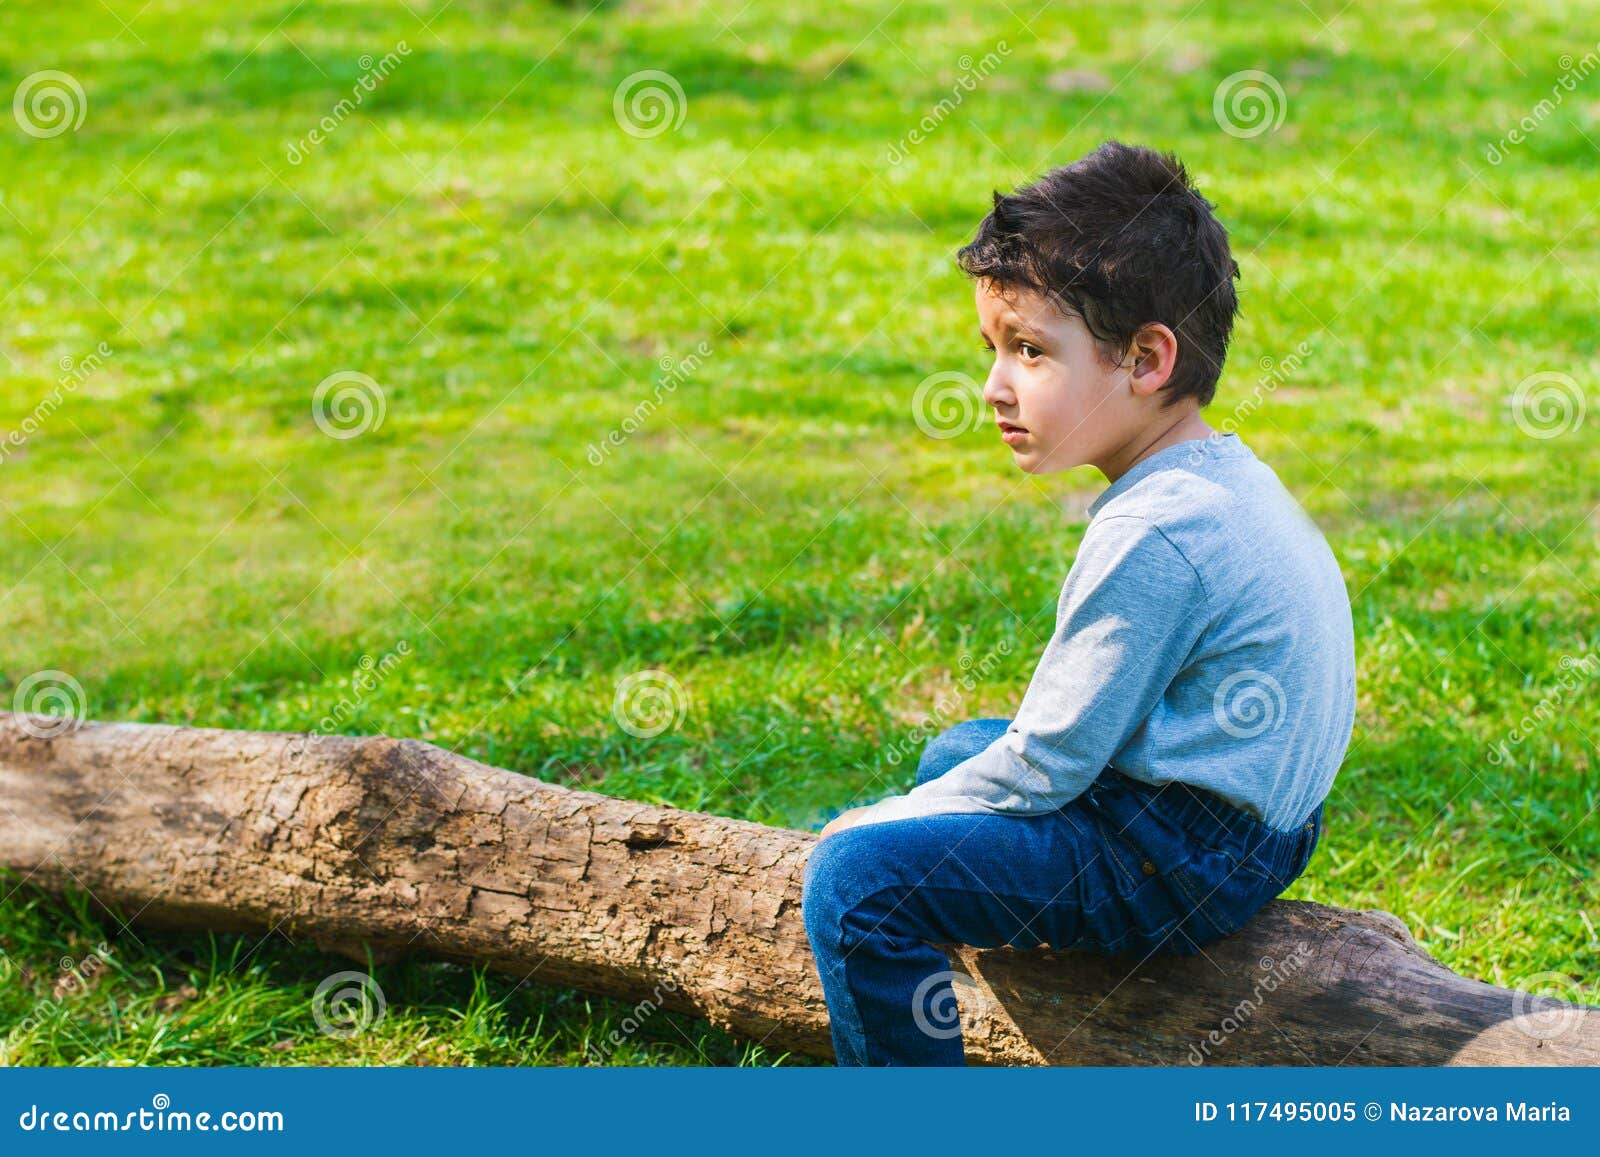 Boy 4 Years Old Sitting Alone On A Log Stock Image - Image Of Single, Alone:  117495005